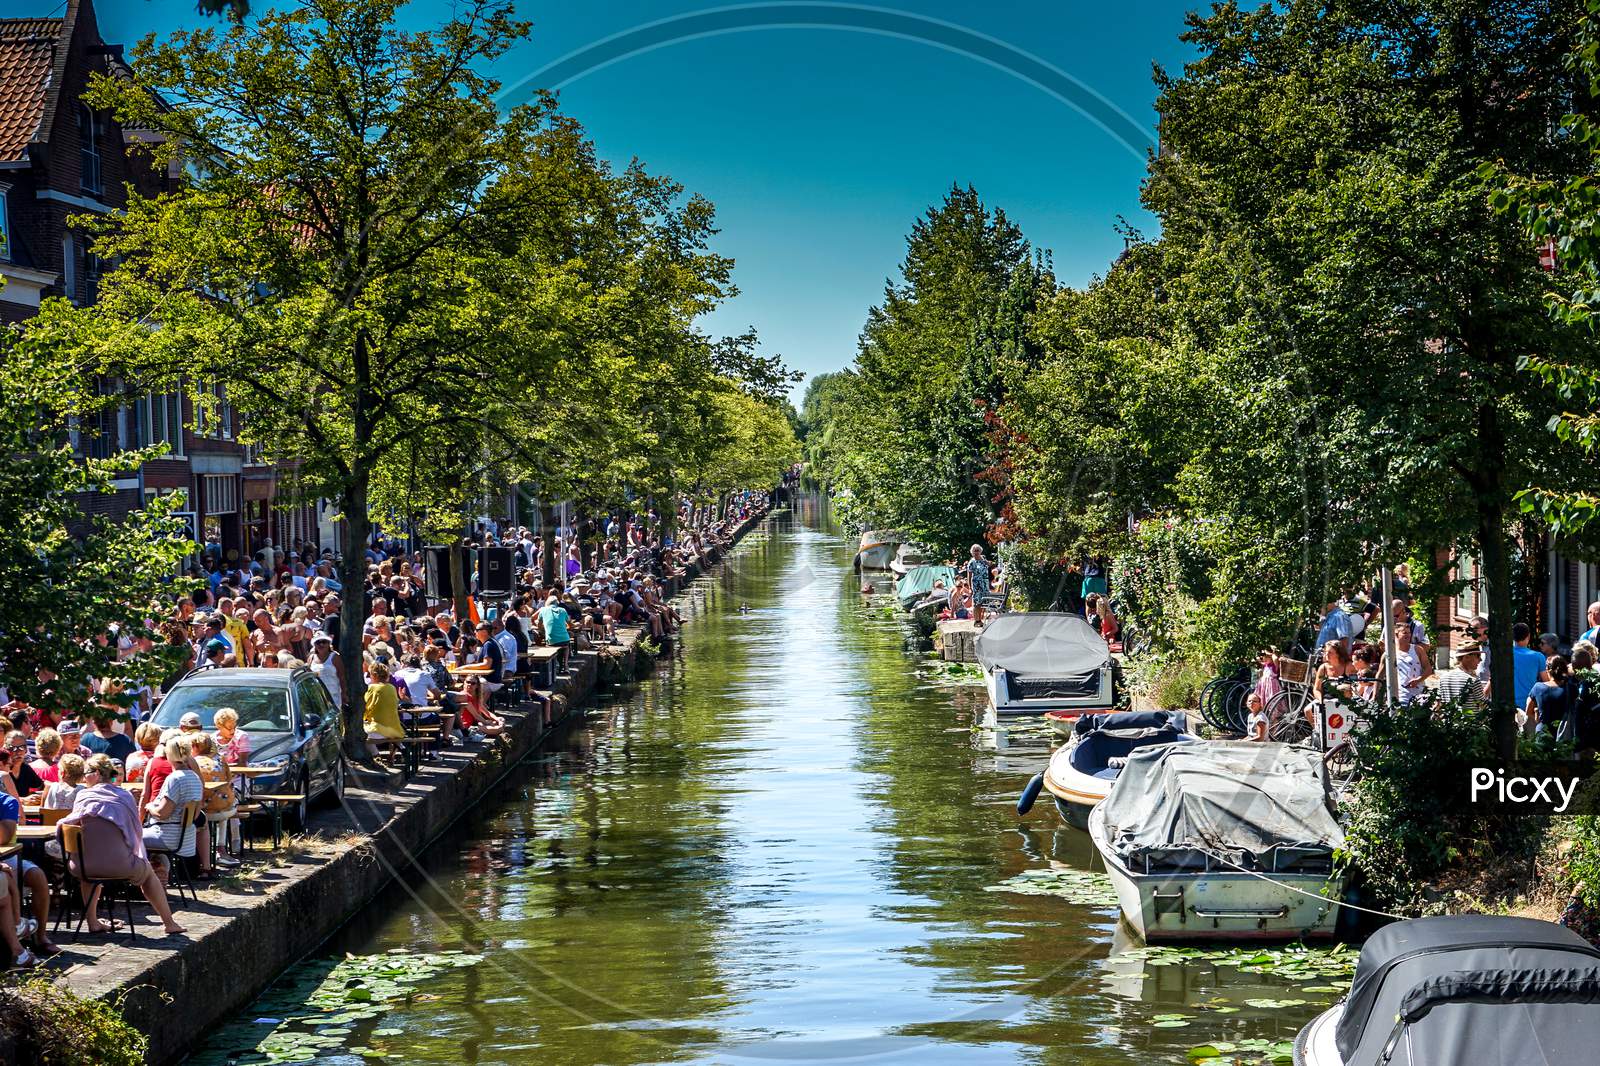 Netherlands, Delft - 5Th August 2018: A Group Of People On A Boat In The Water